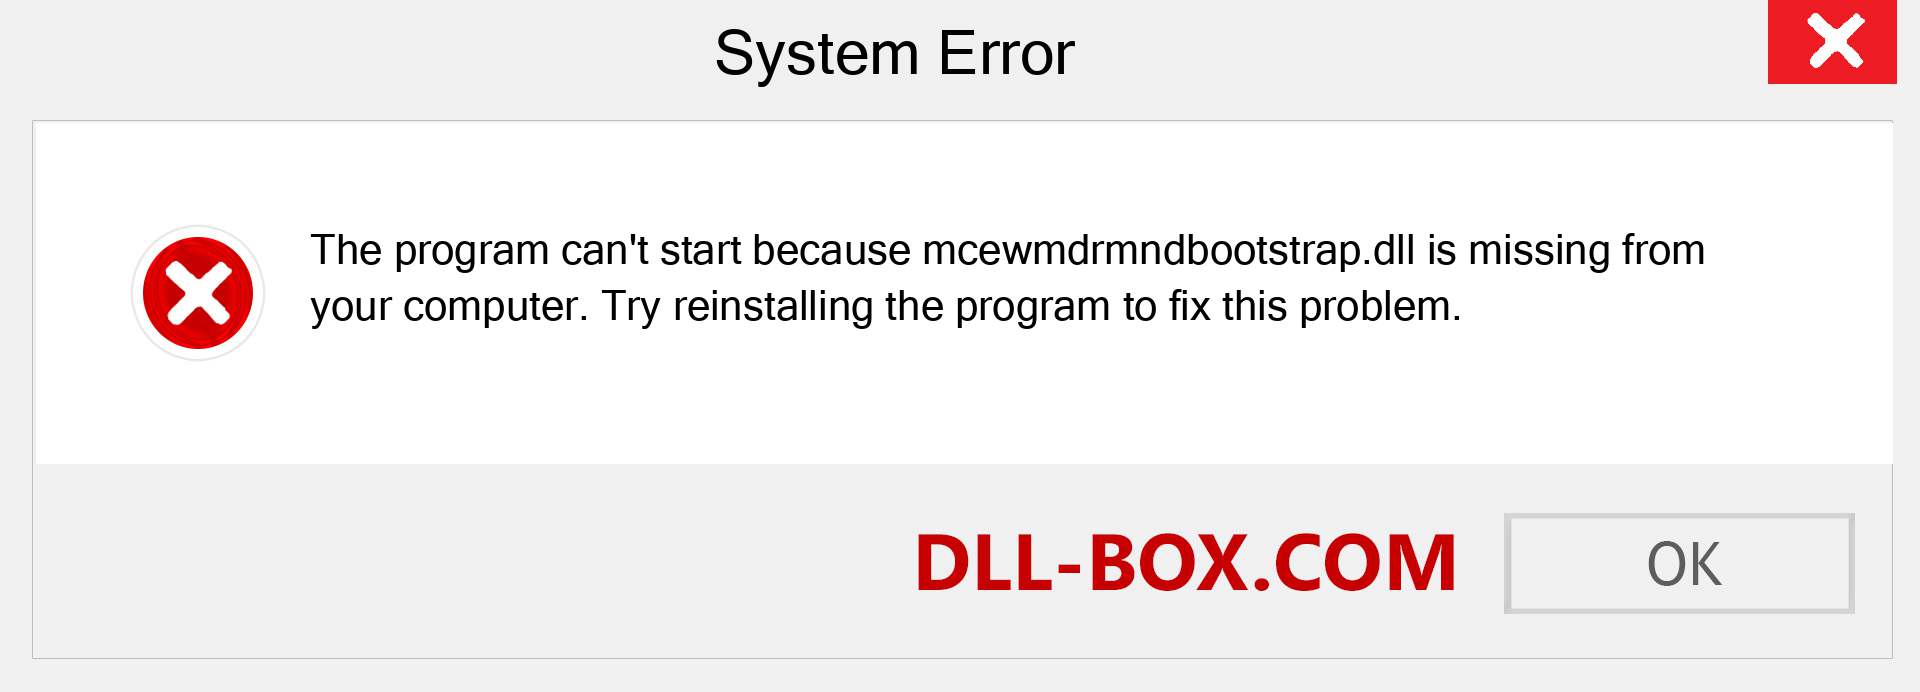  mcewmdrmndbootstrap.dll file is missing?. Download for Windows 7, 8, 10 - Fix  mcewmdrmndbootstrap dll Missing Error on Windows, photos, images